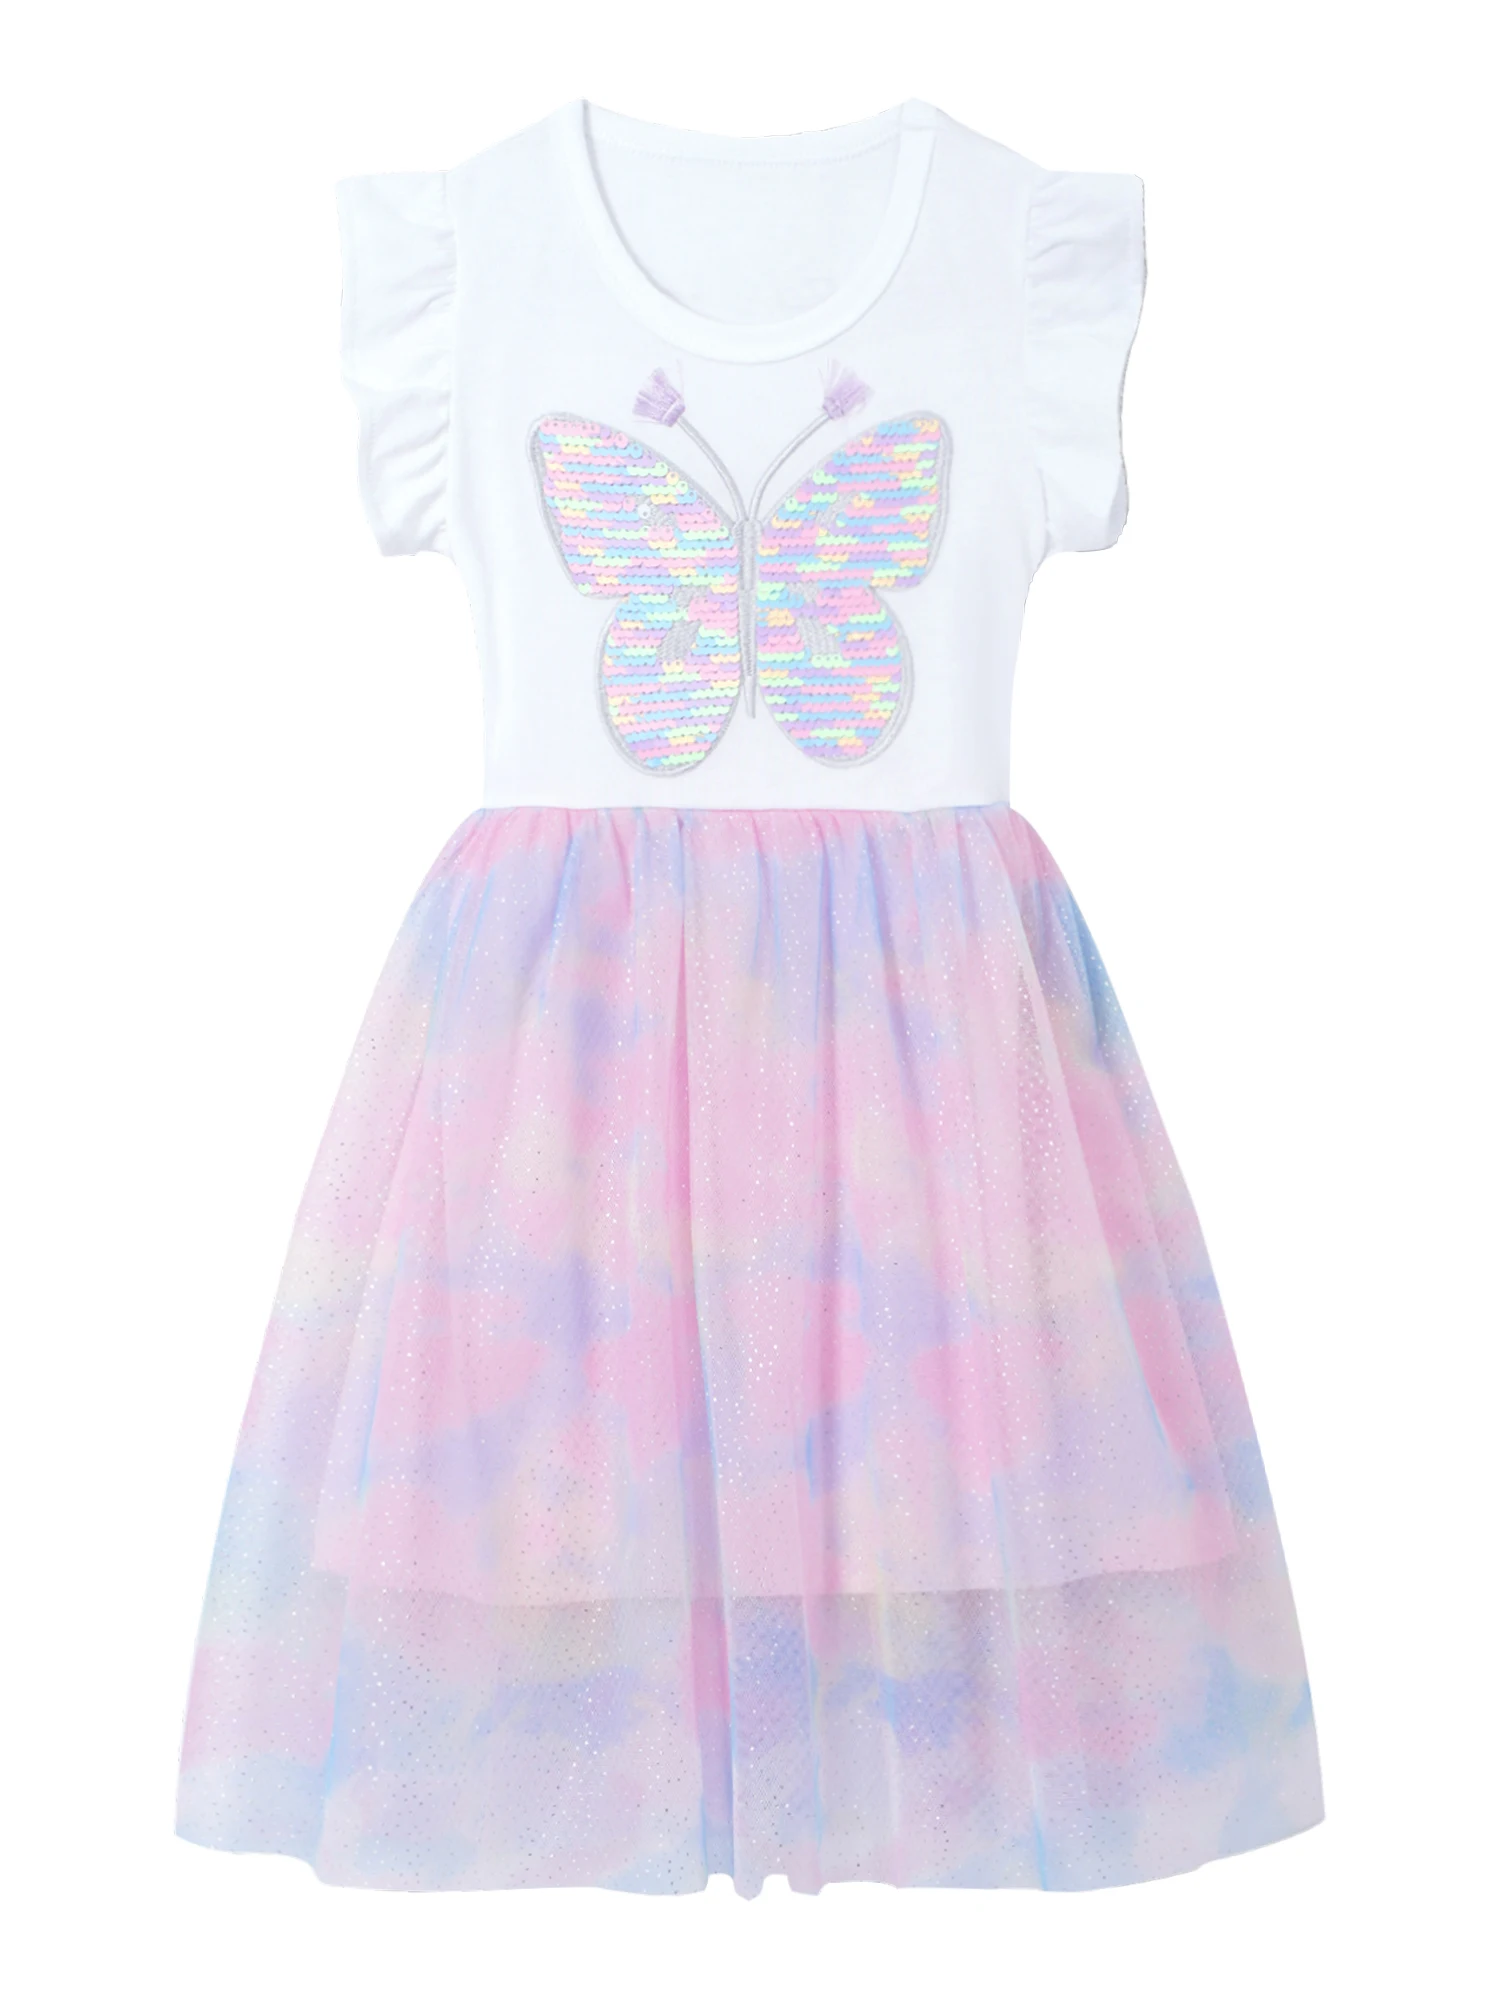 Unicorn Summer Party Princess Dresses With Flying Sleeves